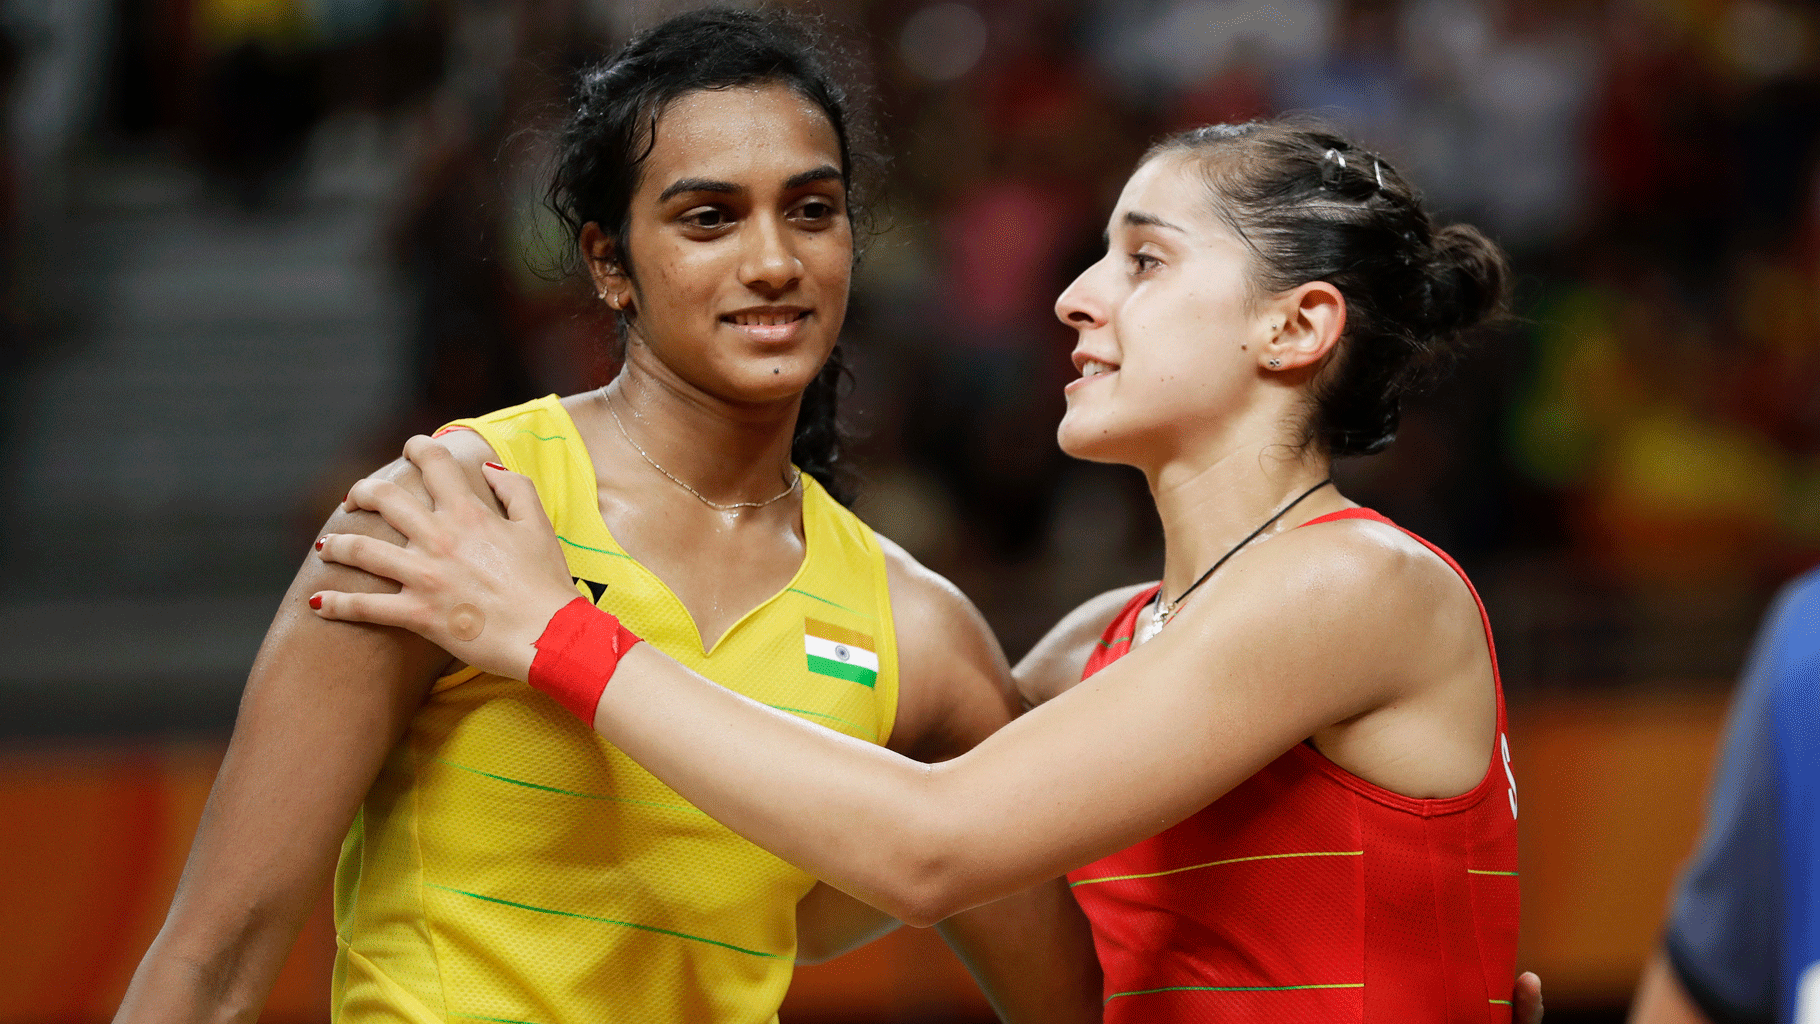  PV Sindhu and Carolina Marin embrace after the Spaniard defeated the Indian to win the women’s singles gold medal at the 2016 Rio Olympics.